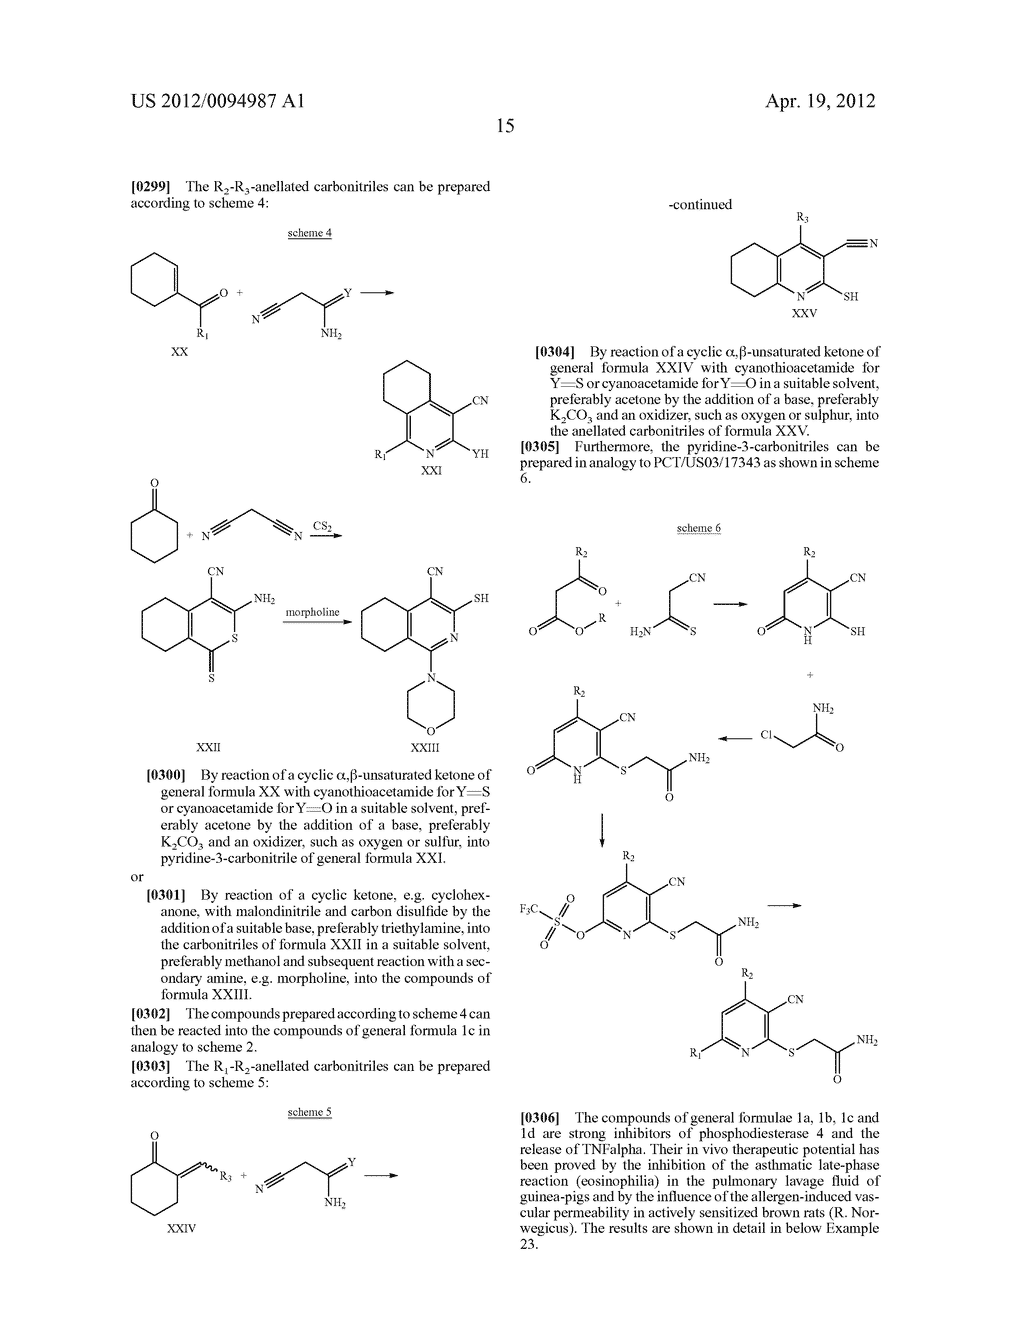 SUBSTITUTED PYRIDO [3', 2': 4, 5] THIENO [3, 2-D] PYRIMIDINES AND PYRIDO     [3', 2': 4, 5] FURO [3, 2-D] PYRIMIDINES USED AS INHIBITORS OF THE PDE-4     AND/OR THE RELEASE OF TNF-alpha - diagram, schematic, and image 17